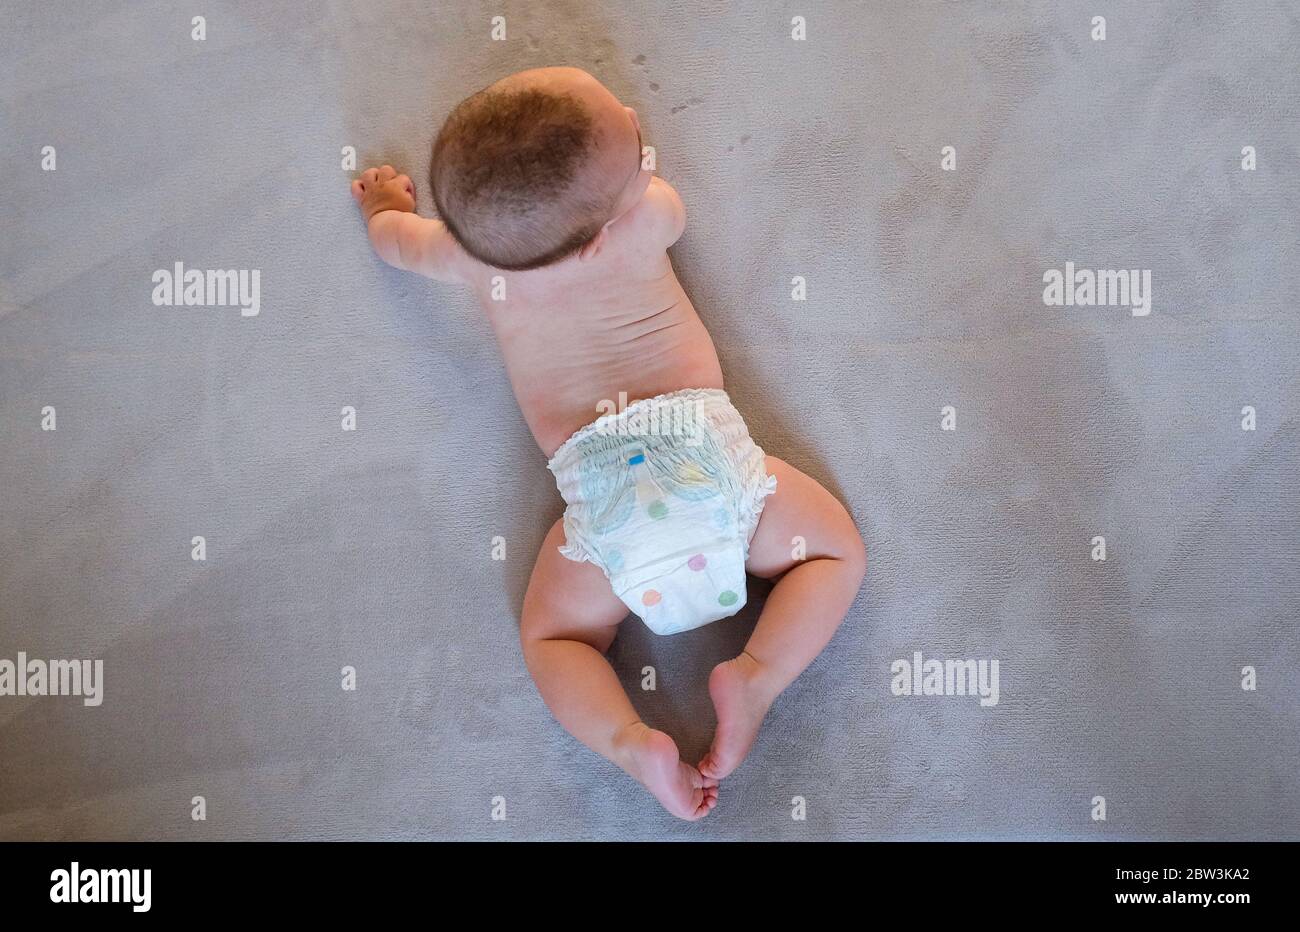 Young baby boy of 6 months in a nappie on a rug Stock Photo